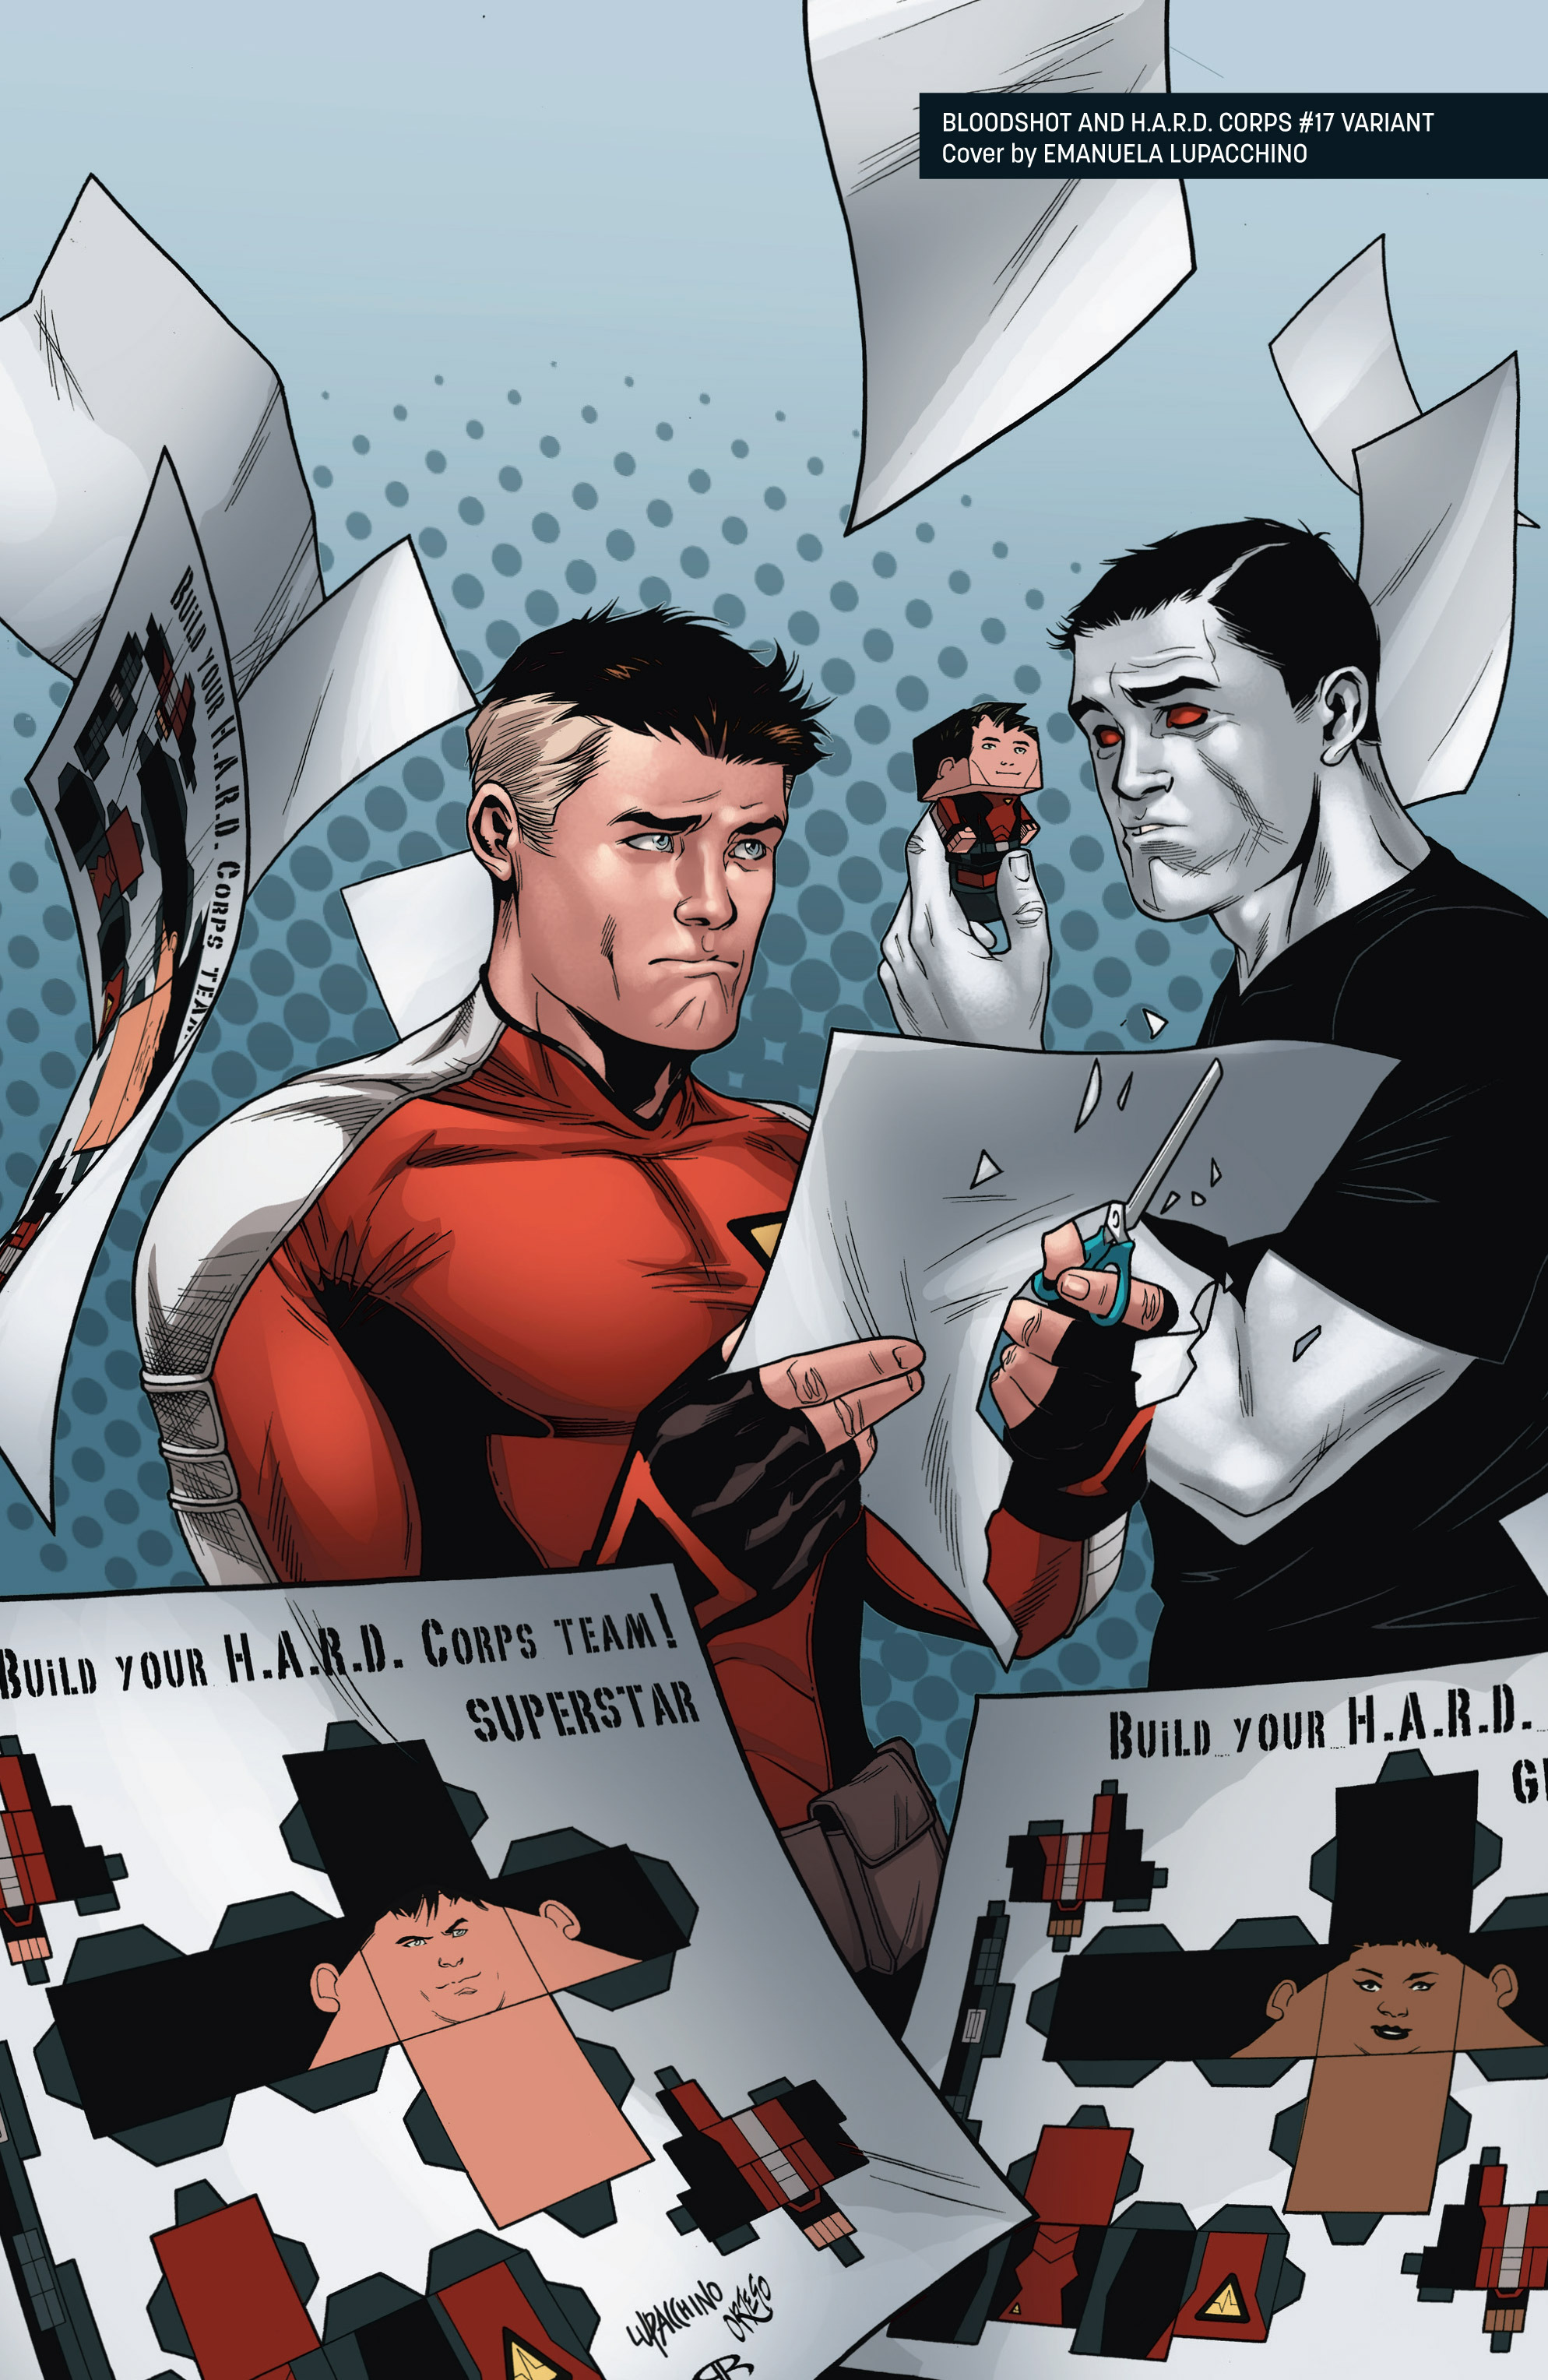 Read online Bloodshot: H.A.R.D. Corps comic -  Issue # Full - 126